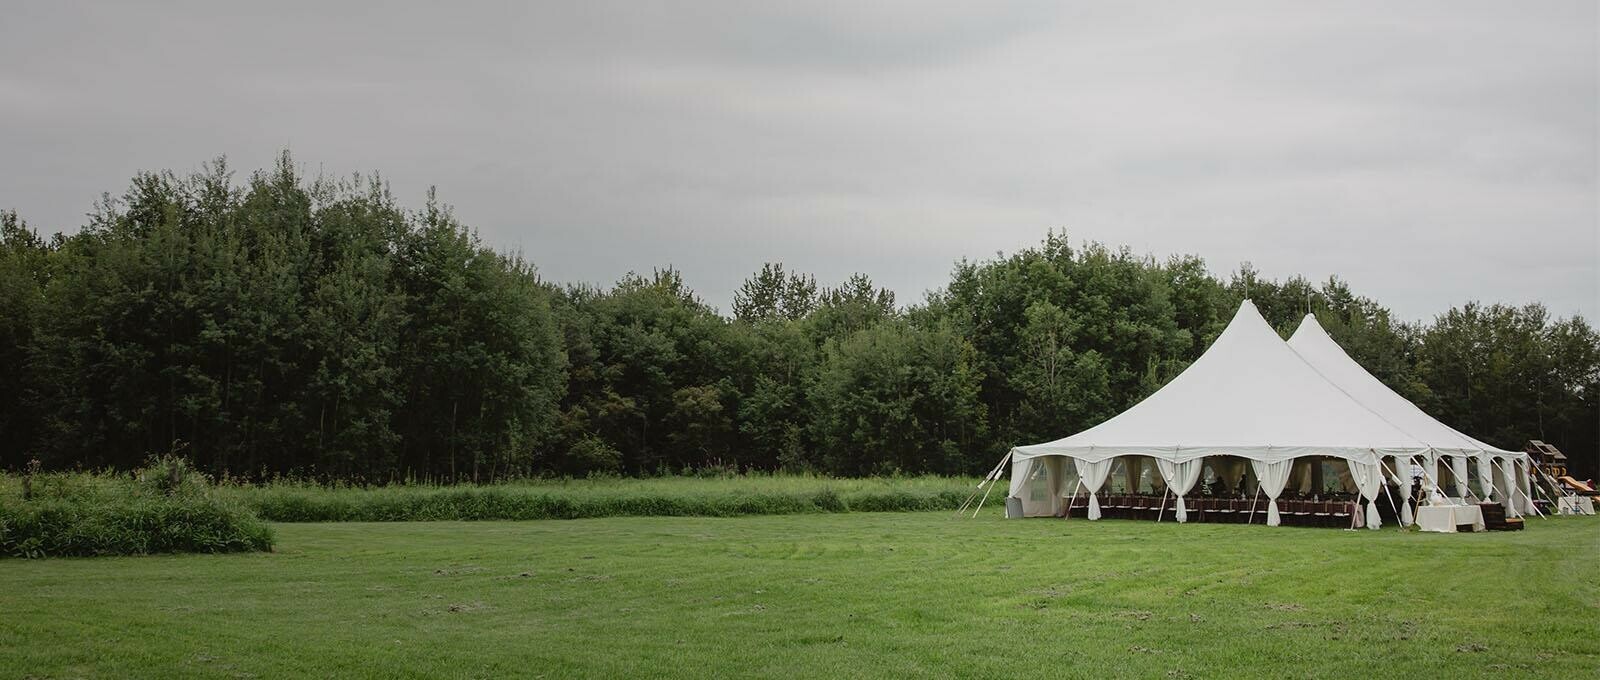 Tent Rentals Red Deer featuring a white Pole Pent on a grassy field for a wedding reception.